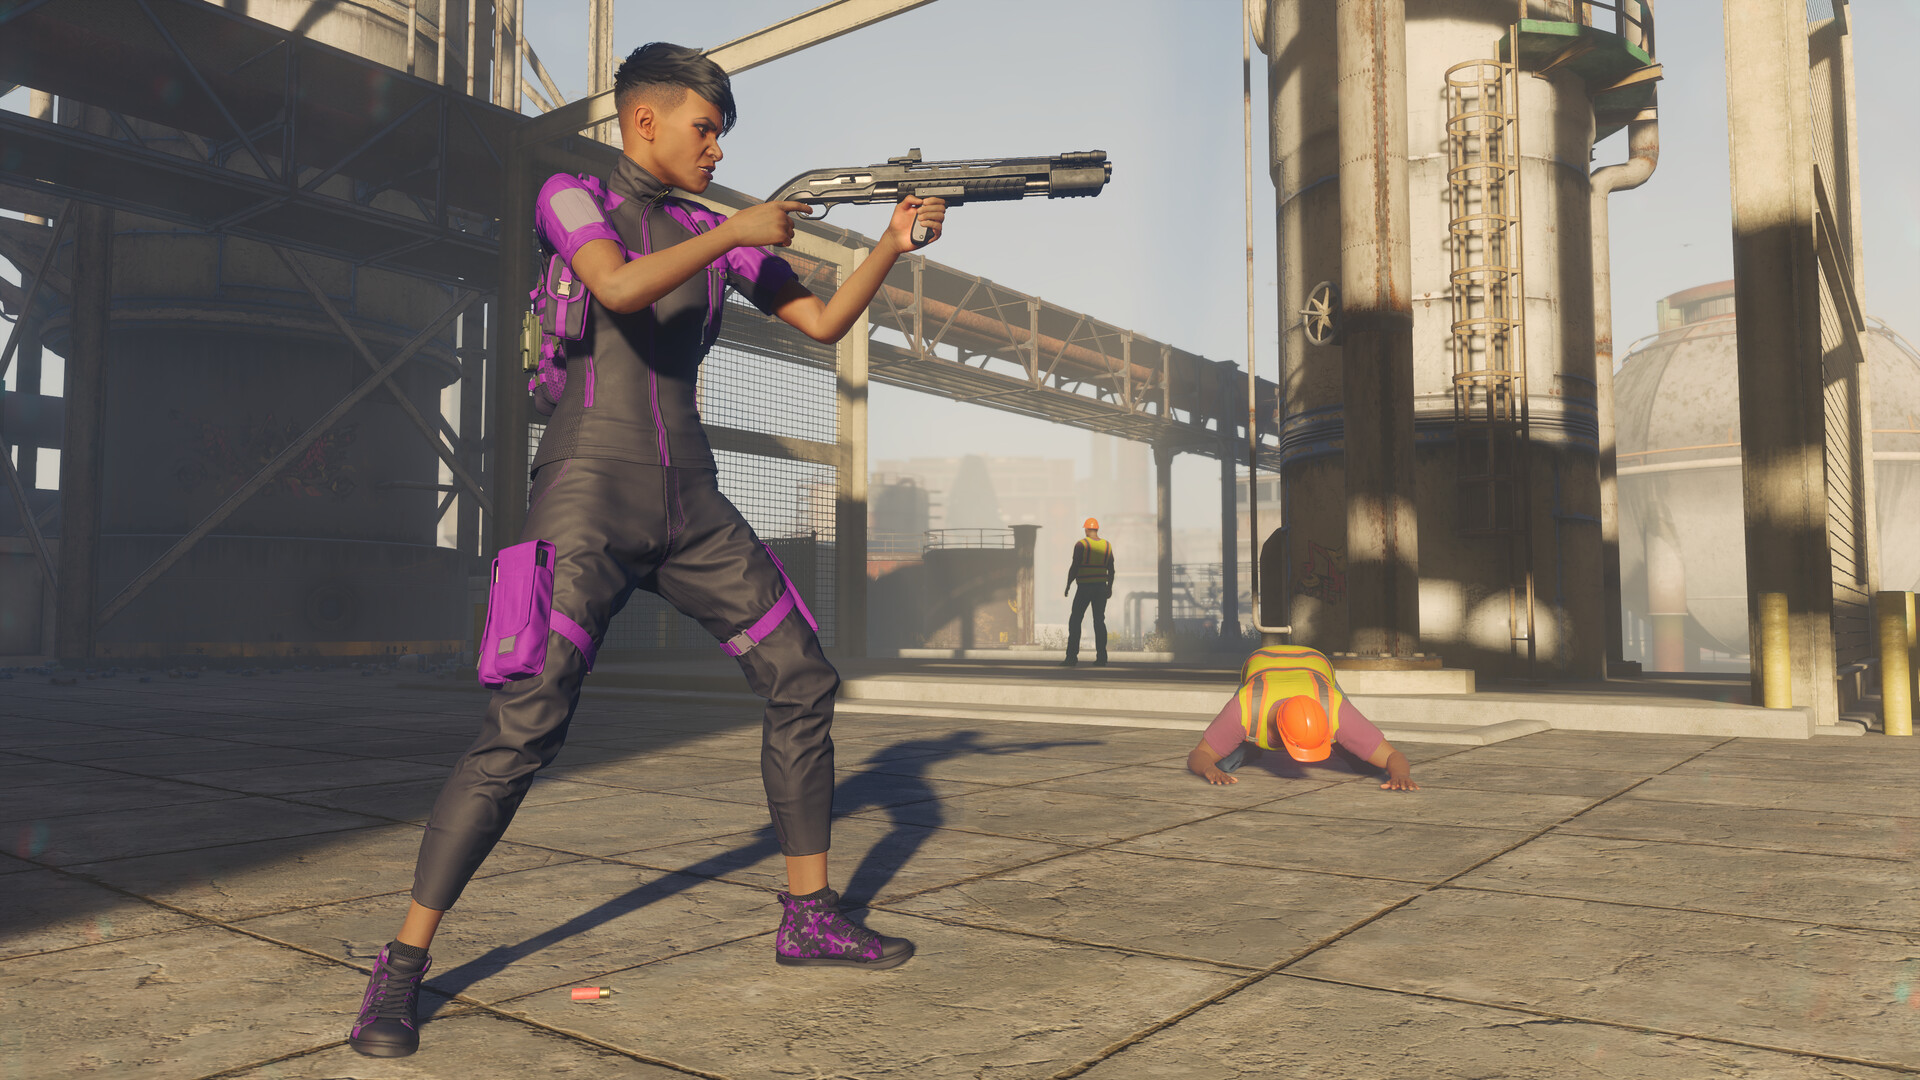 Save 67% on Saints Row - Going Commando Cosmetic Pack on Steam